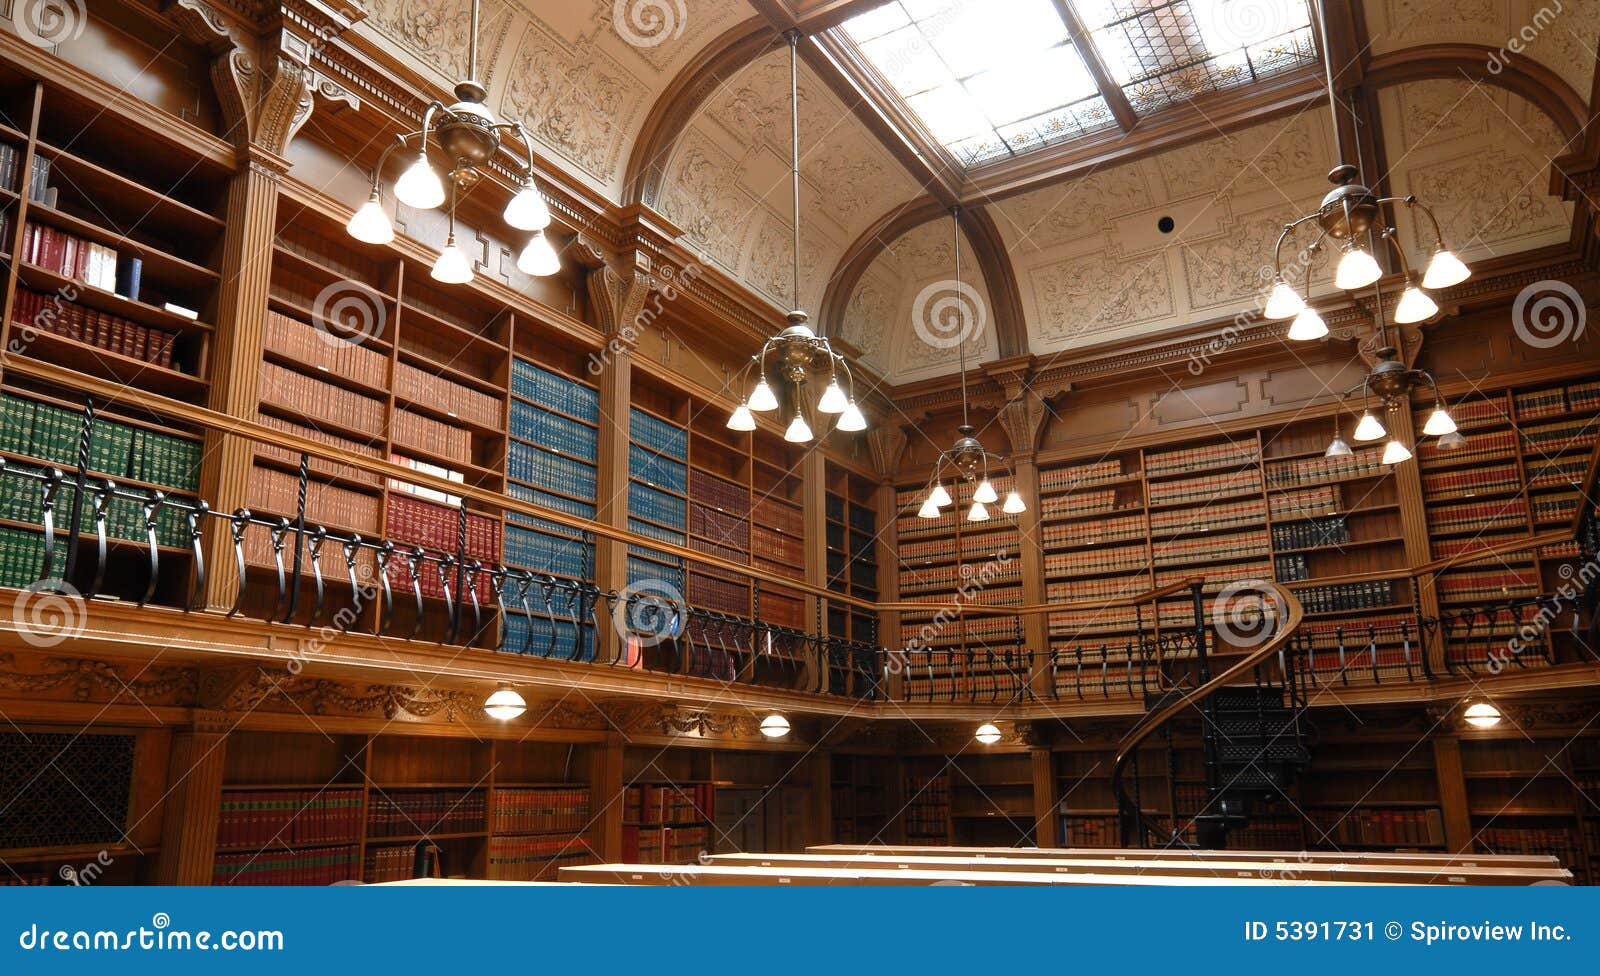 Law school library stock image. Image of precedent, aisle - 5391731